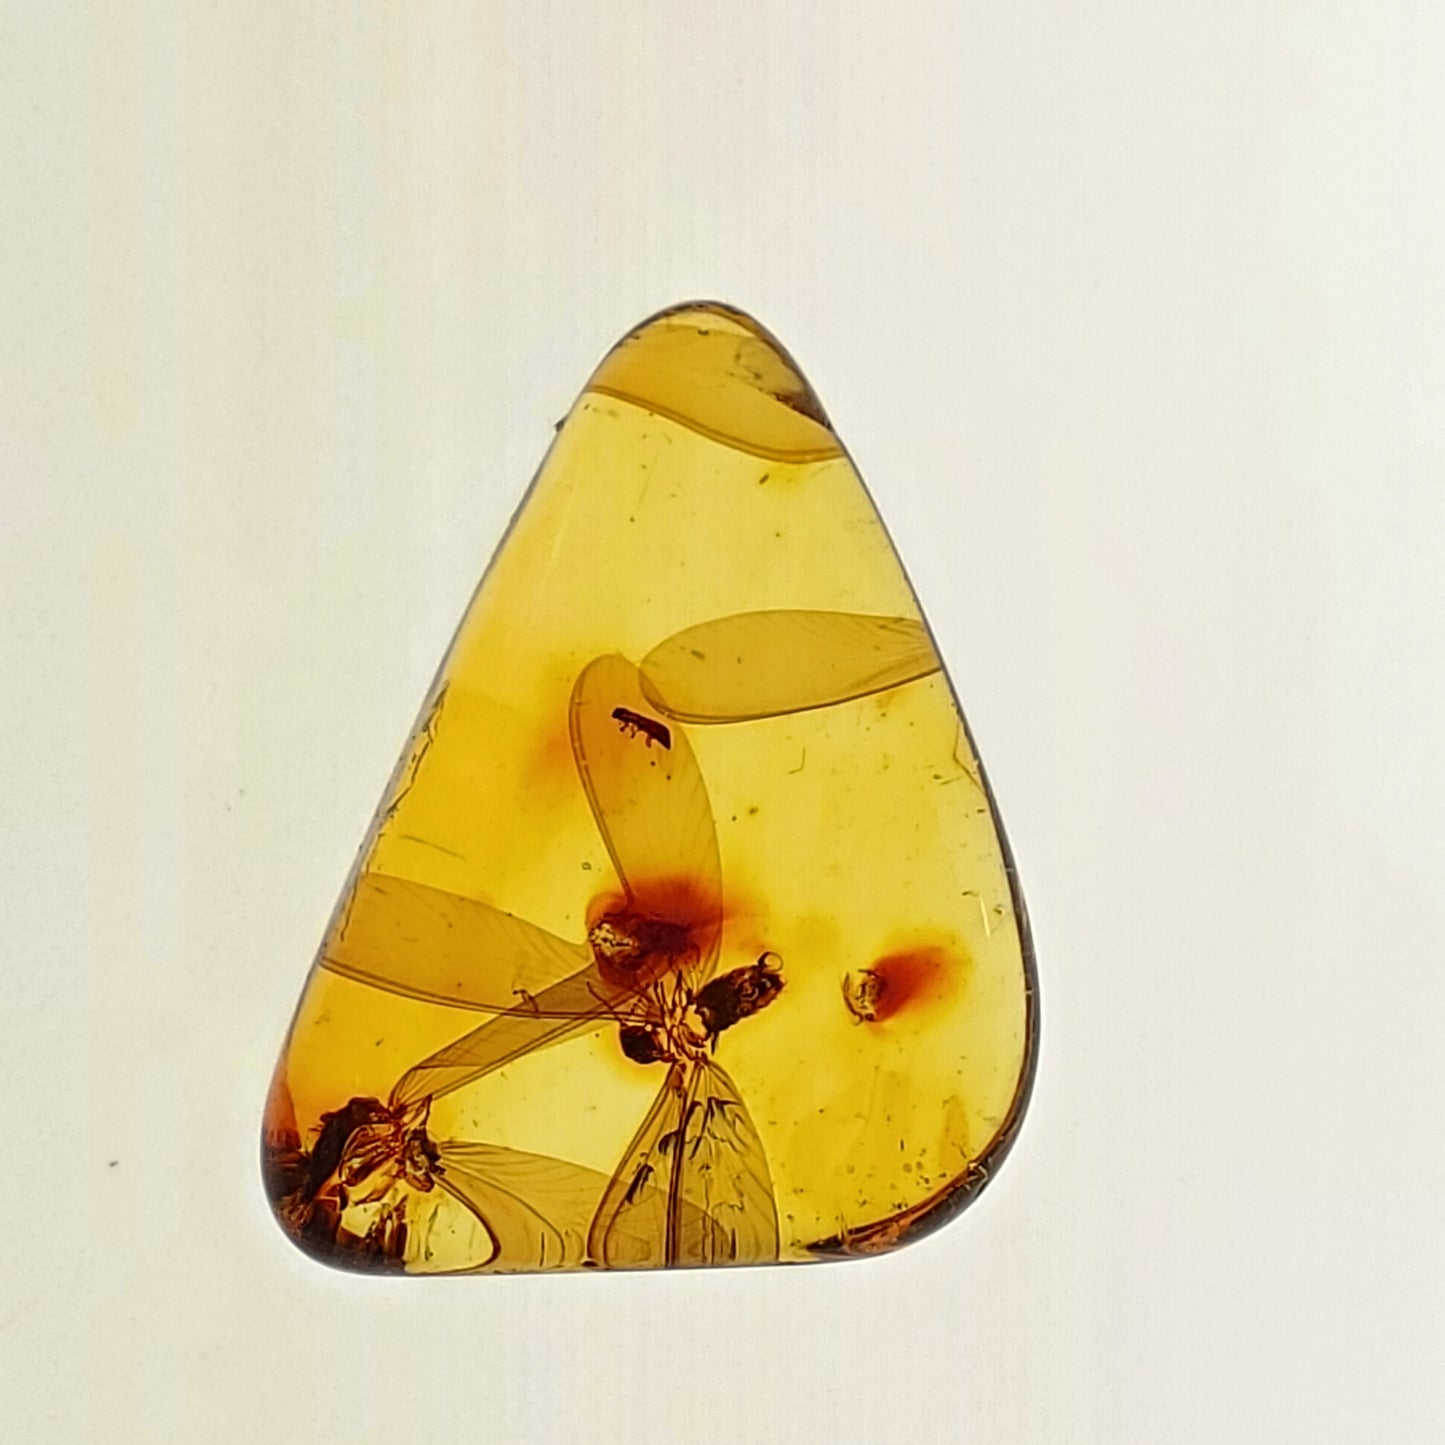 Colombian Amber with 2+ Insects and Inclusions